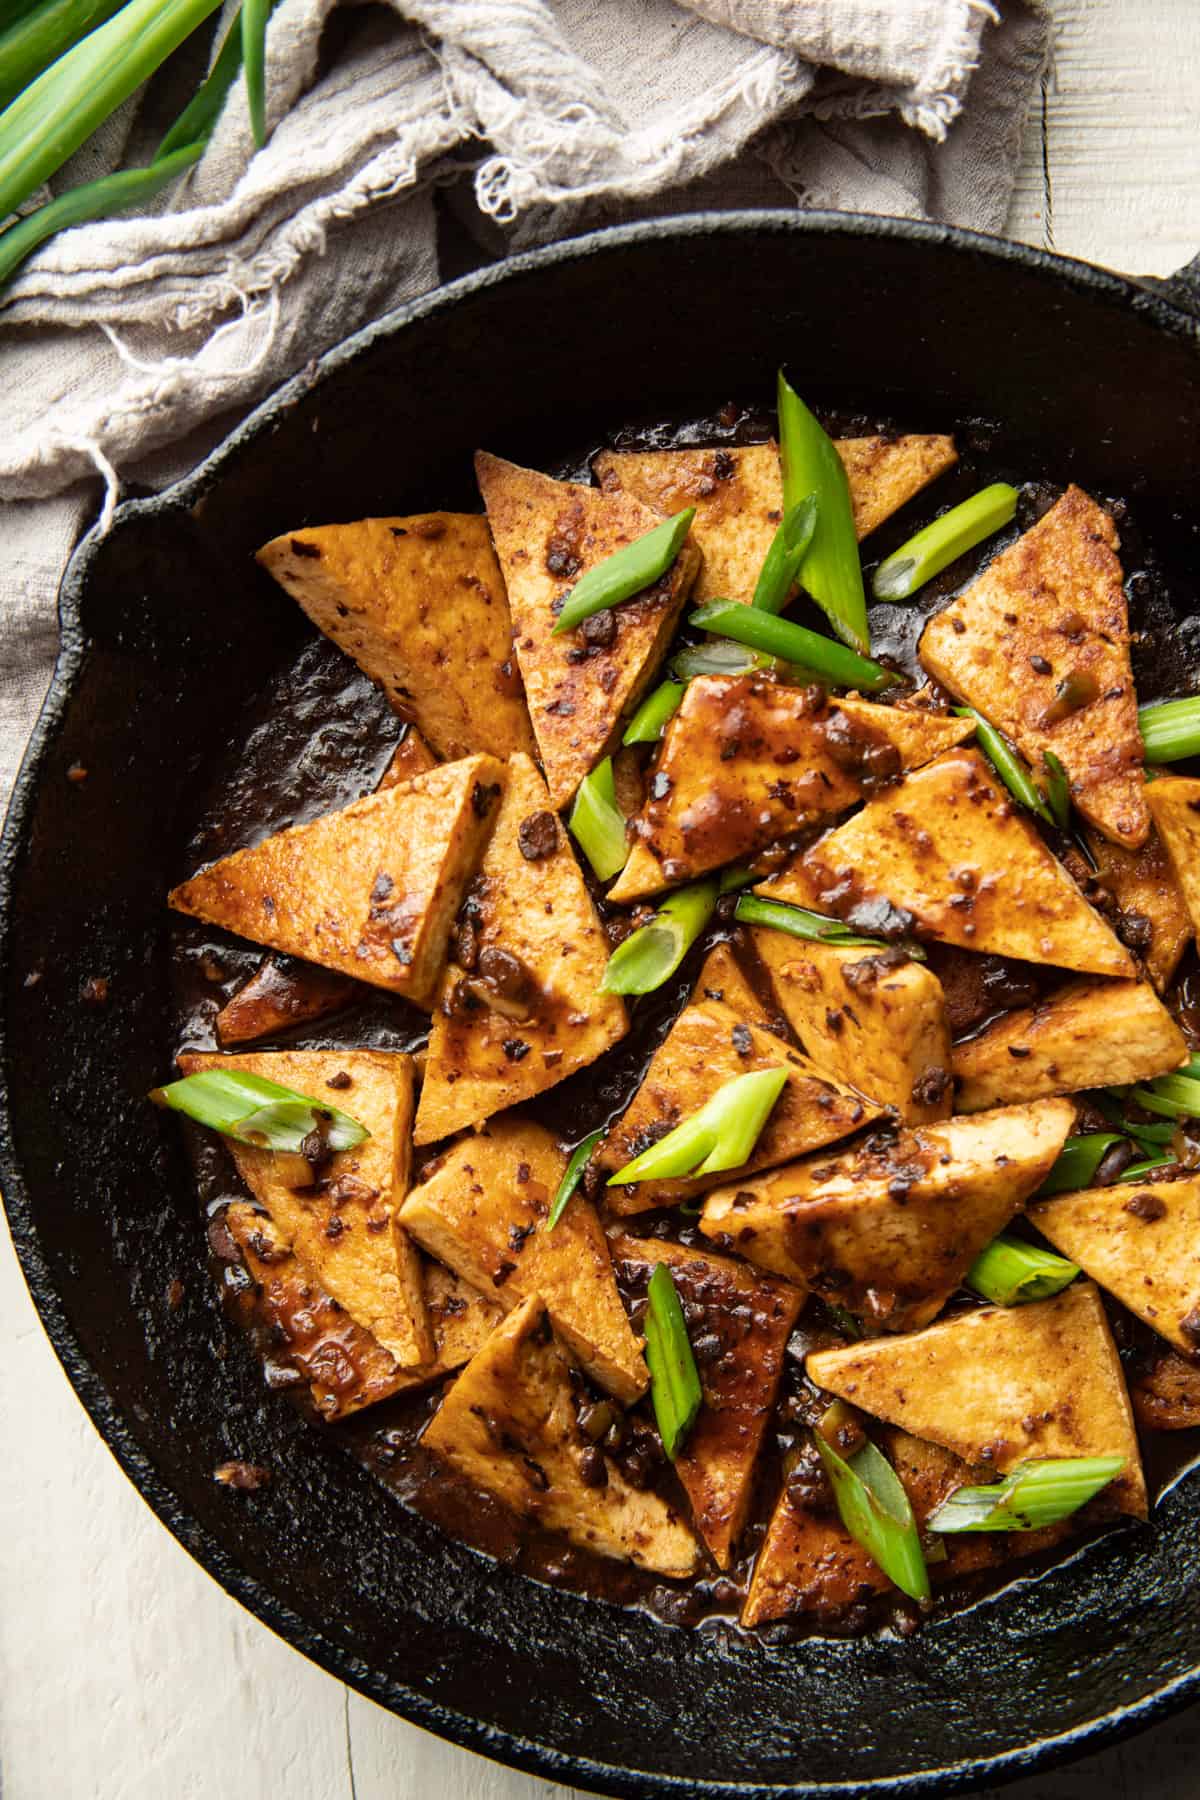 Skillet filled with Tofu with Chinese Black Bean Sauce and scallions.